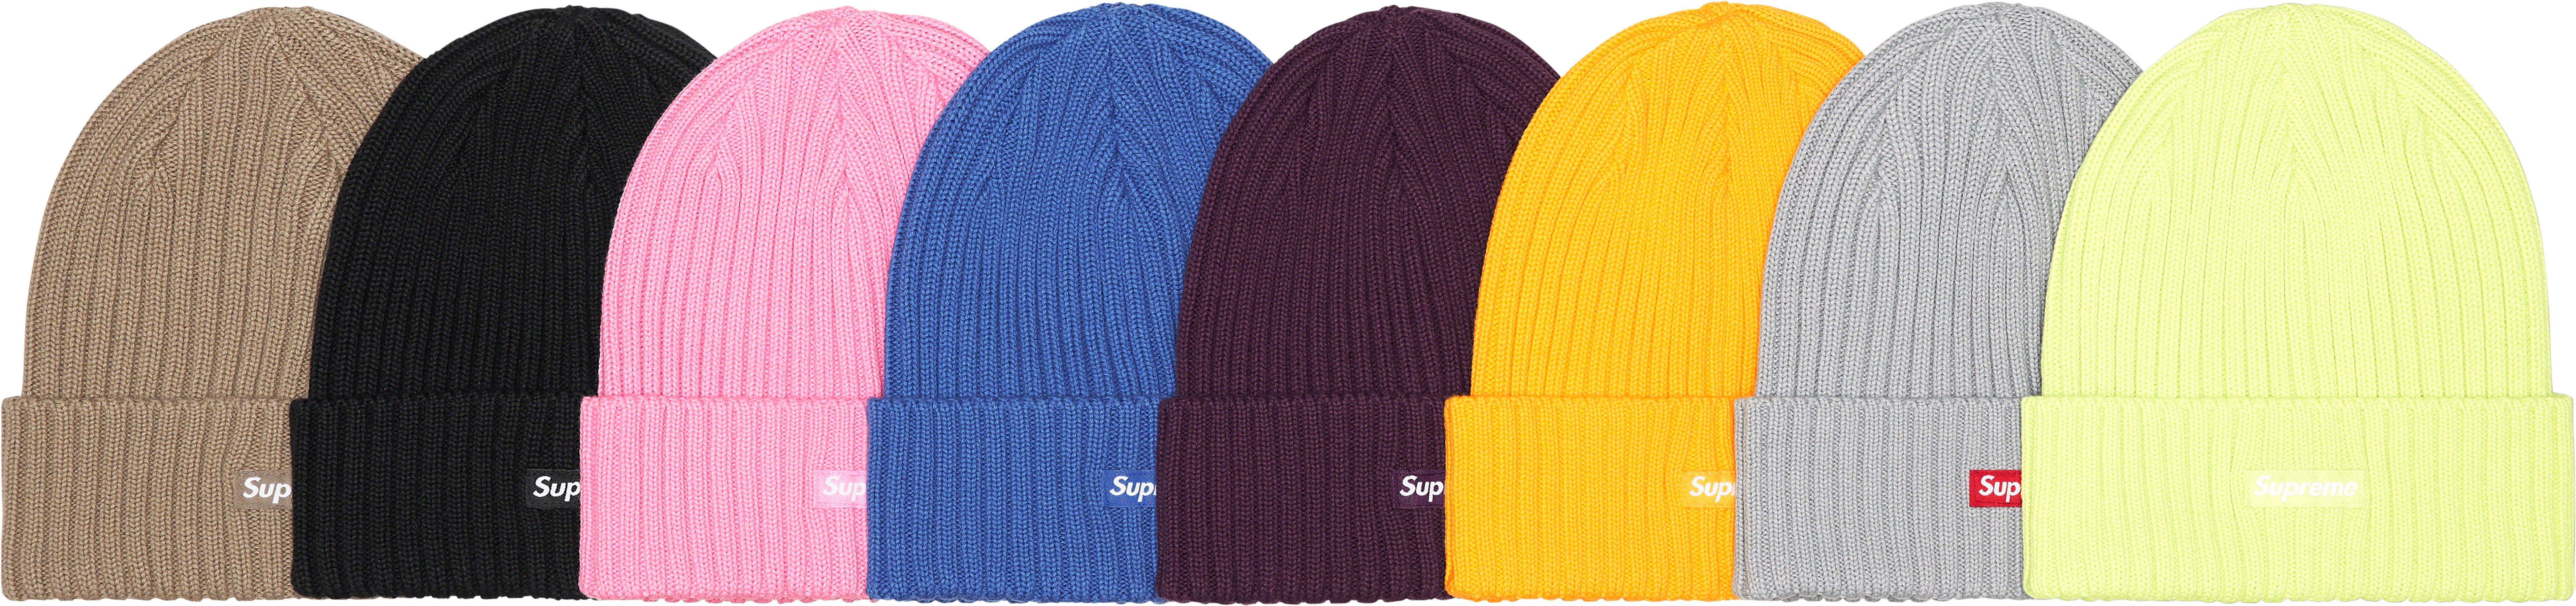 Embroidered Brim Crusher - Spring/Summer 2023 Preview – Supreme